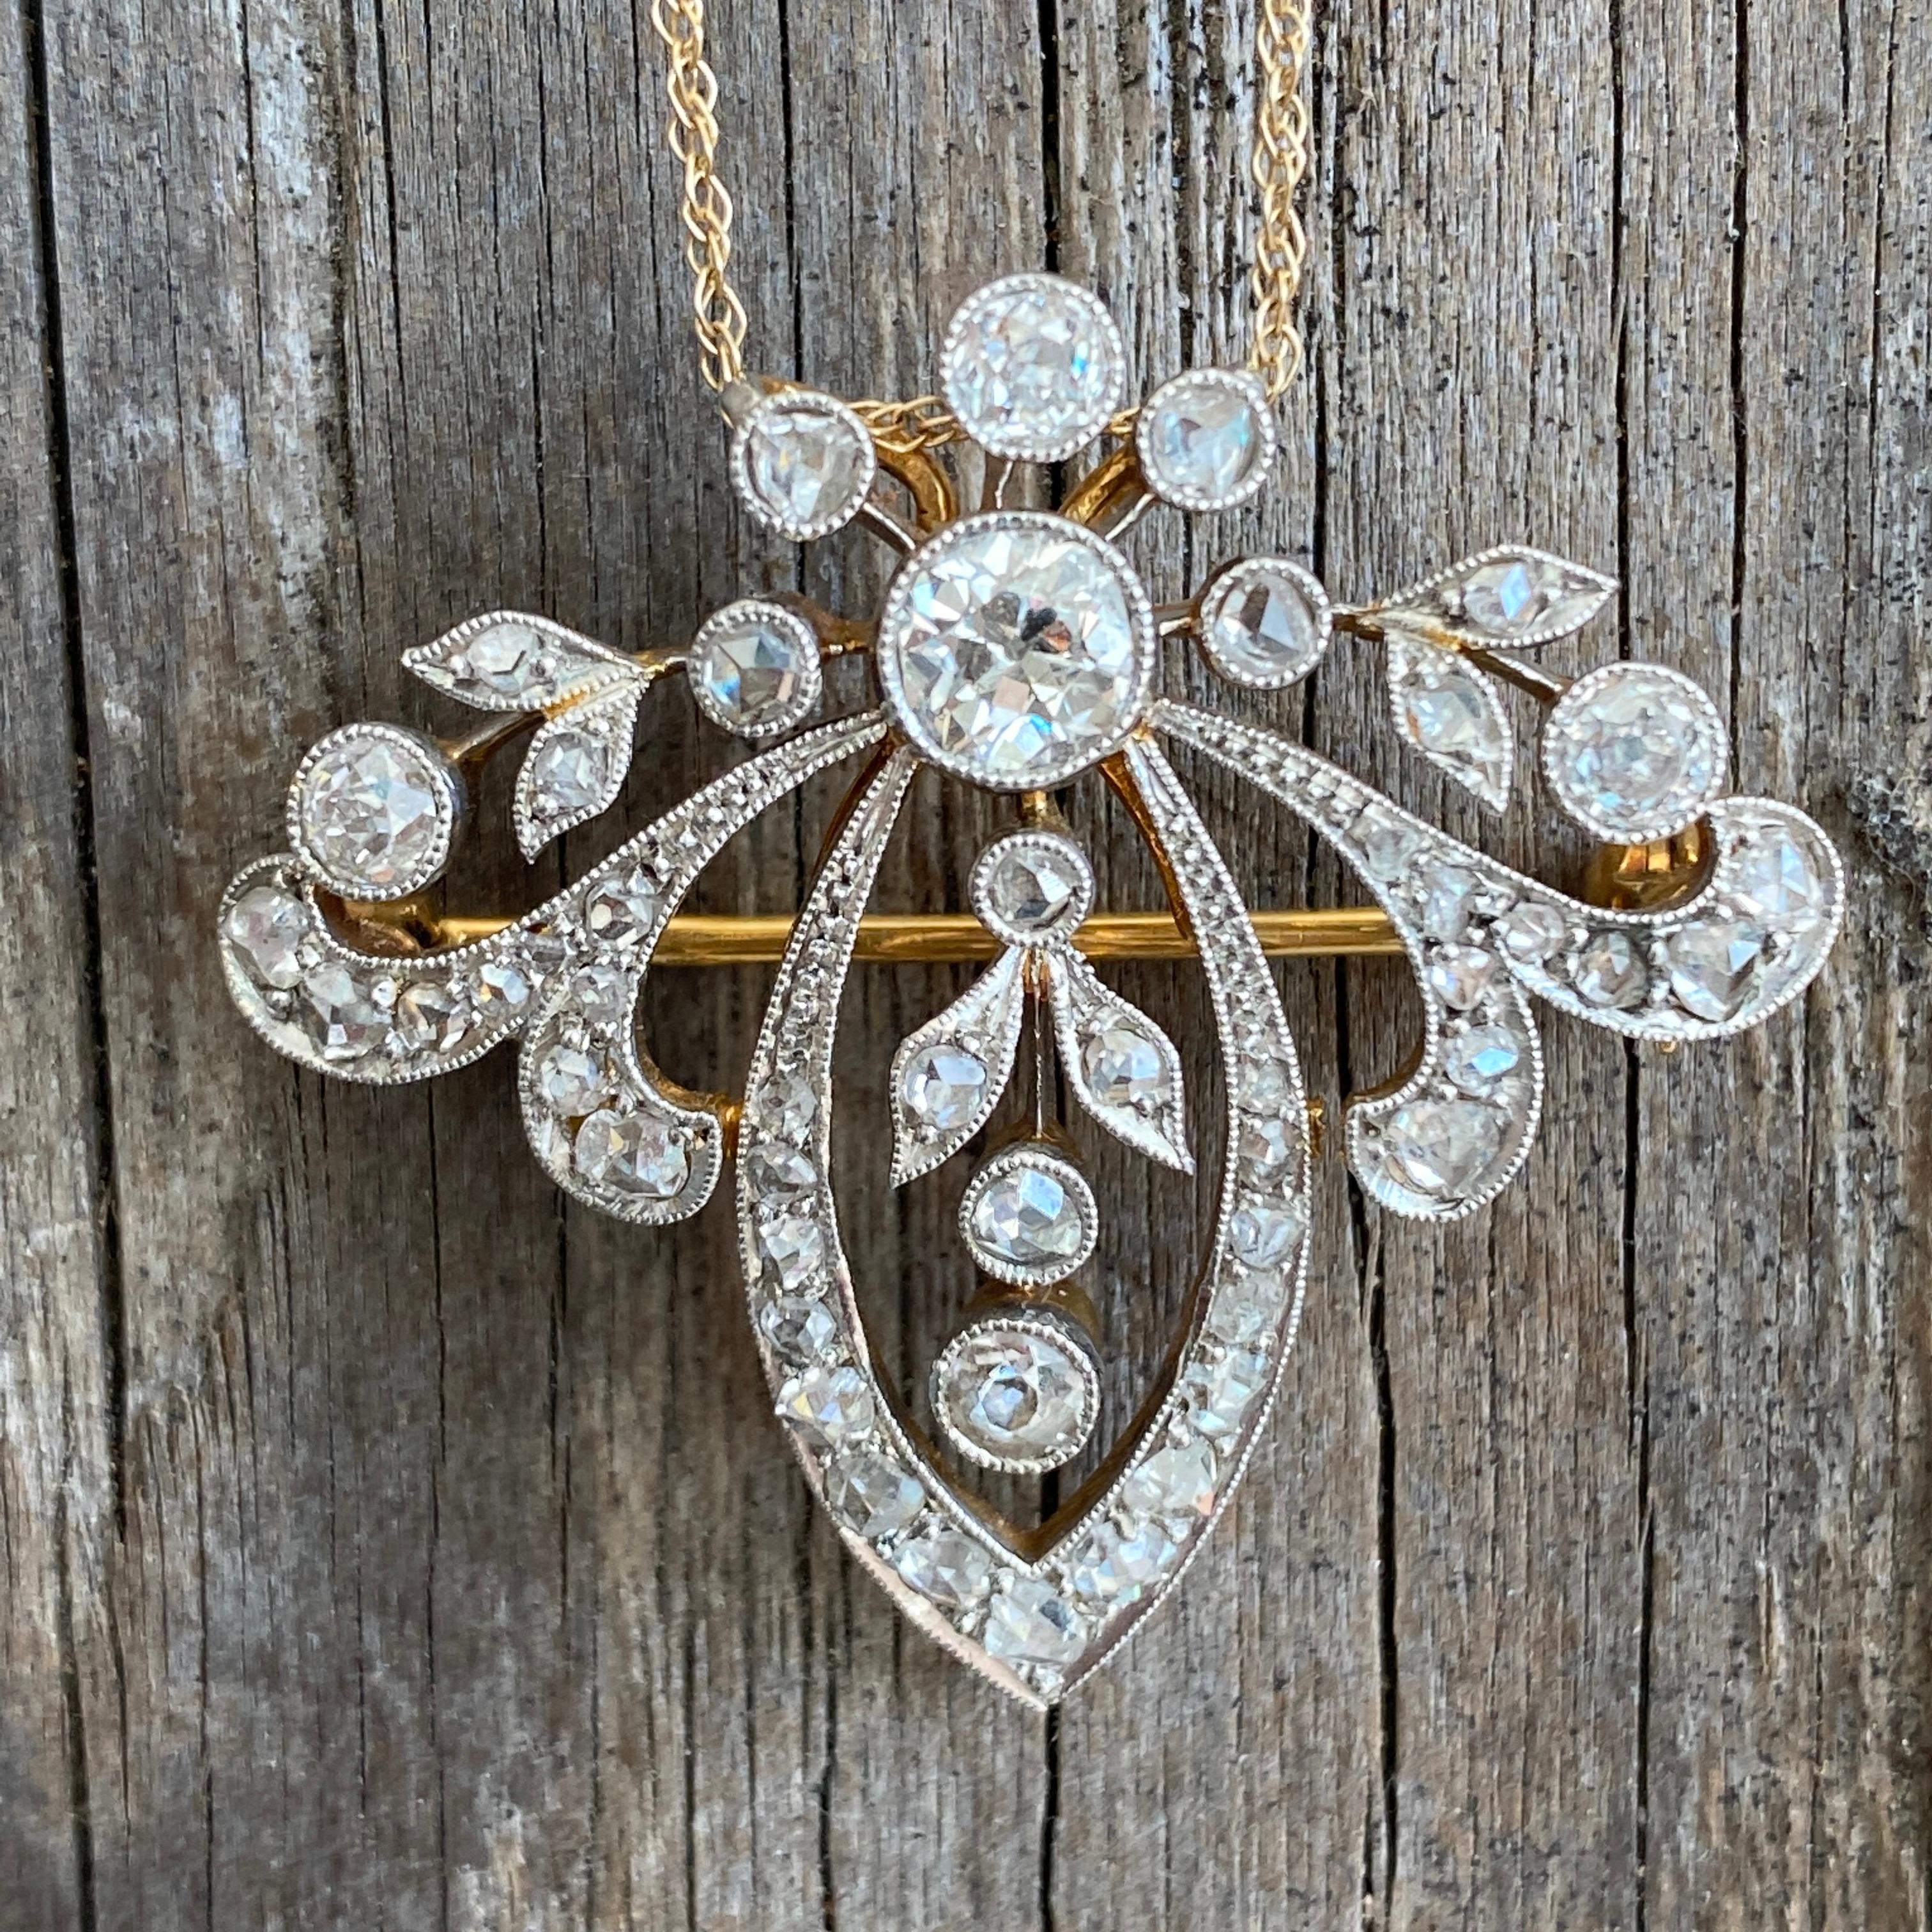 Edwardian Belle Epoque 1.81 CTW Diamonds Pendant Necklace In Excellent Condition For Sale In Scotts Valley, CA